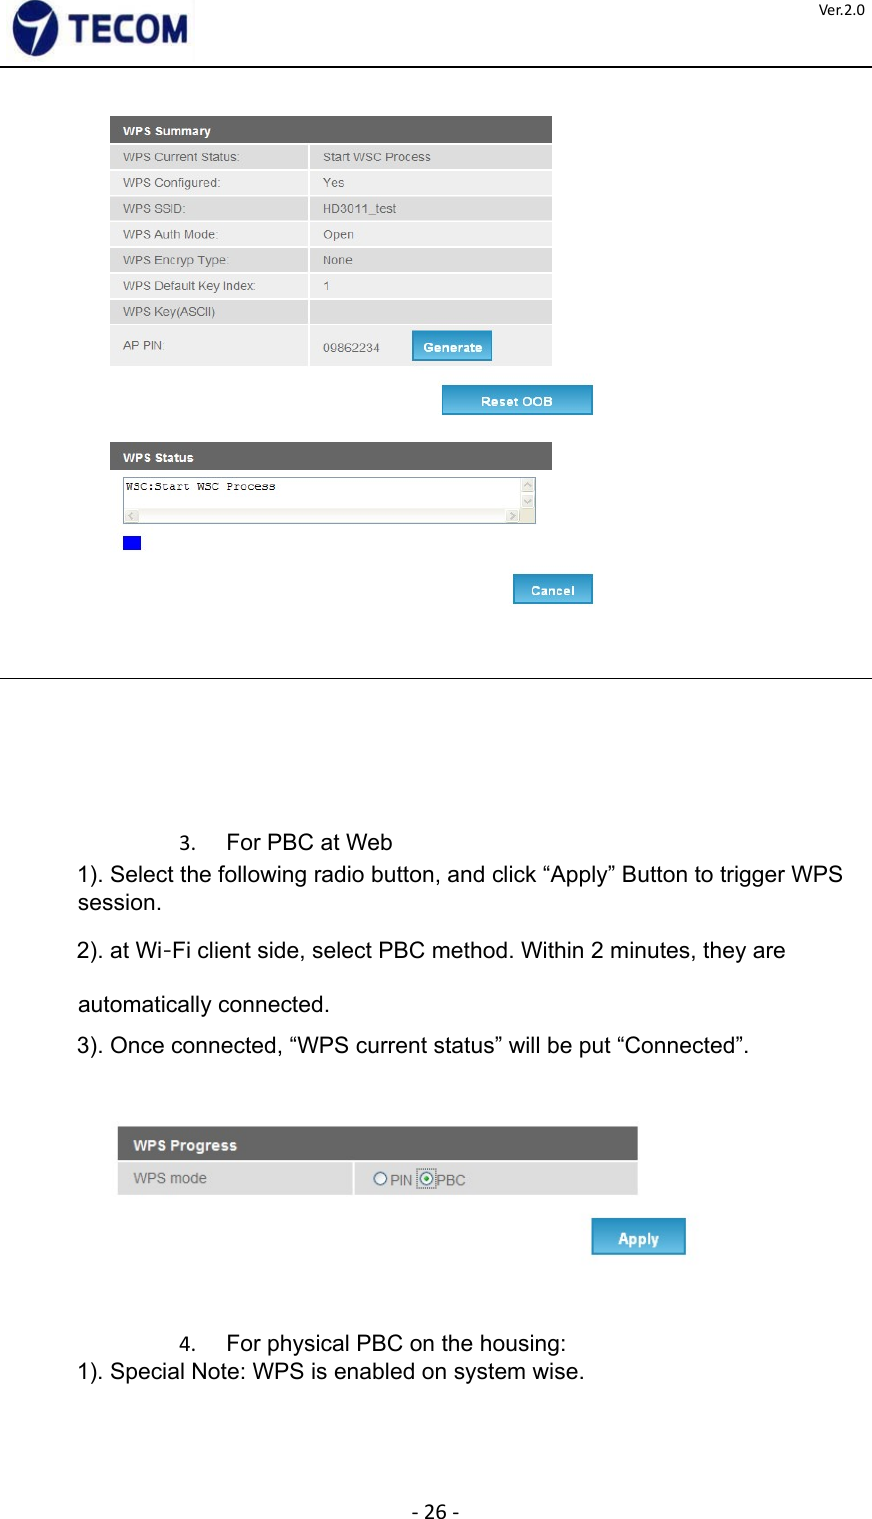  ‐26‐Ver.2.0             3.  For PBC at Web  1). Select the following radio button, and click “Apply” Button to trigger WPS session.  2). at Wi‐Fi client side, select PBC method. Within 2 minutes, they are automatically connected.  3). Once connected, “WPS current status” will be put “Connected”.        4.  For physical PBC on the housing:   1). Special Note: WPS is enabled on system wise.    